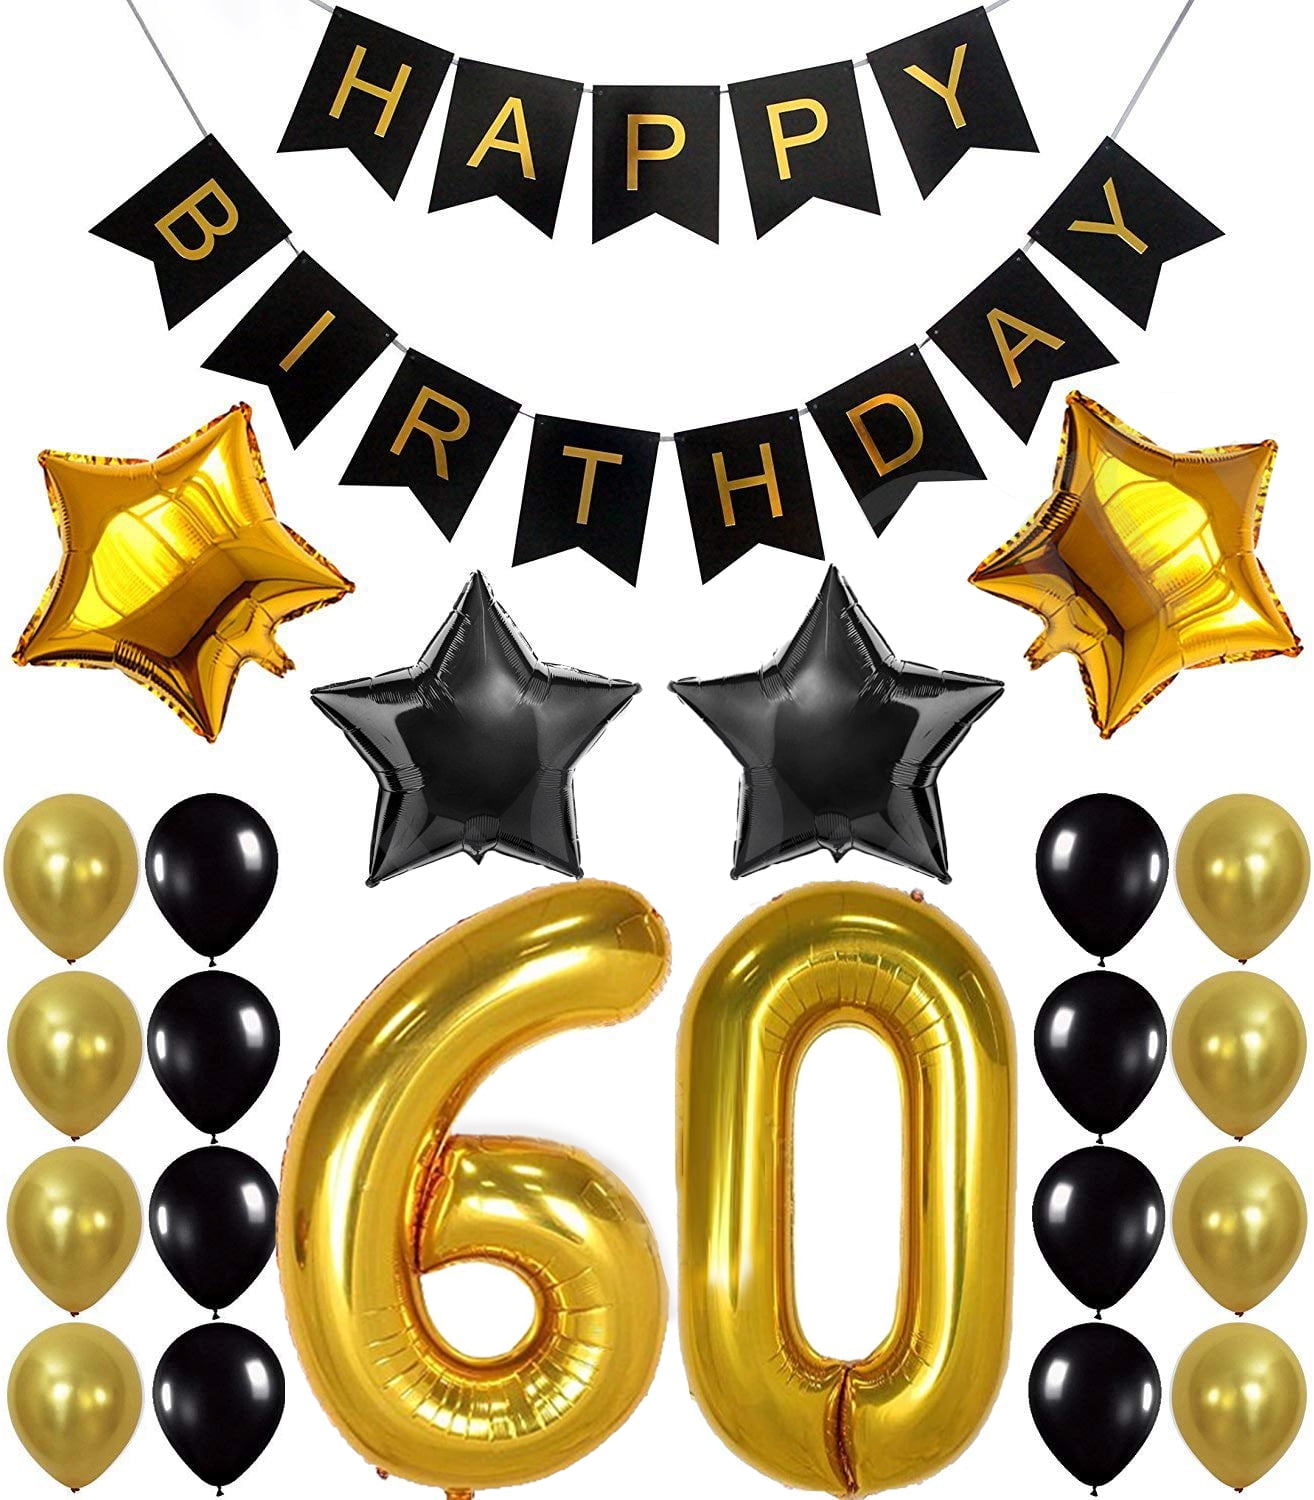 AGE 60 BLACK & GOLD HAPPY BIRTHDAY PARTY DECORATIONS 60th TABLEWARE cp 